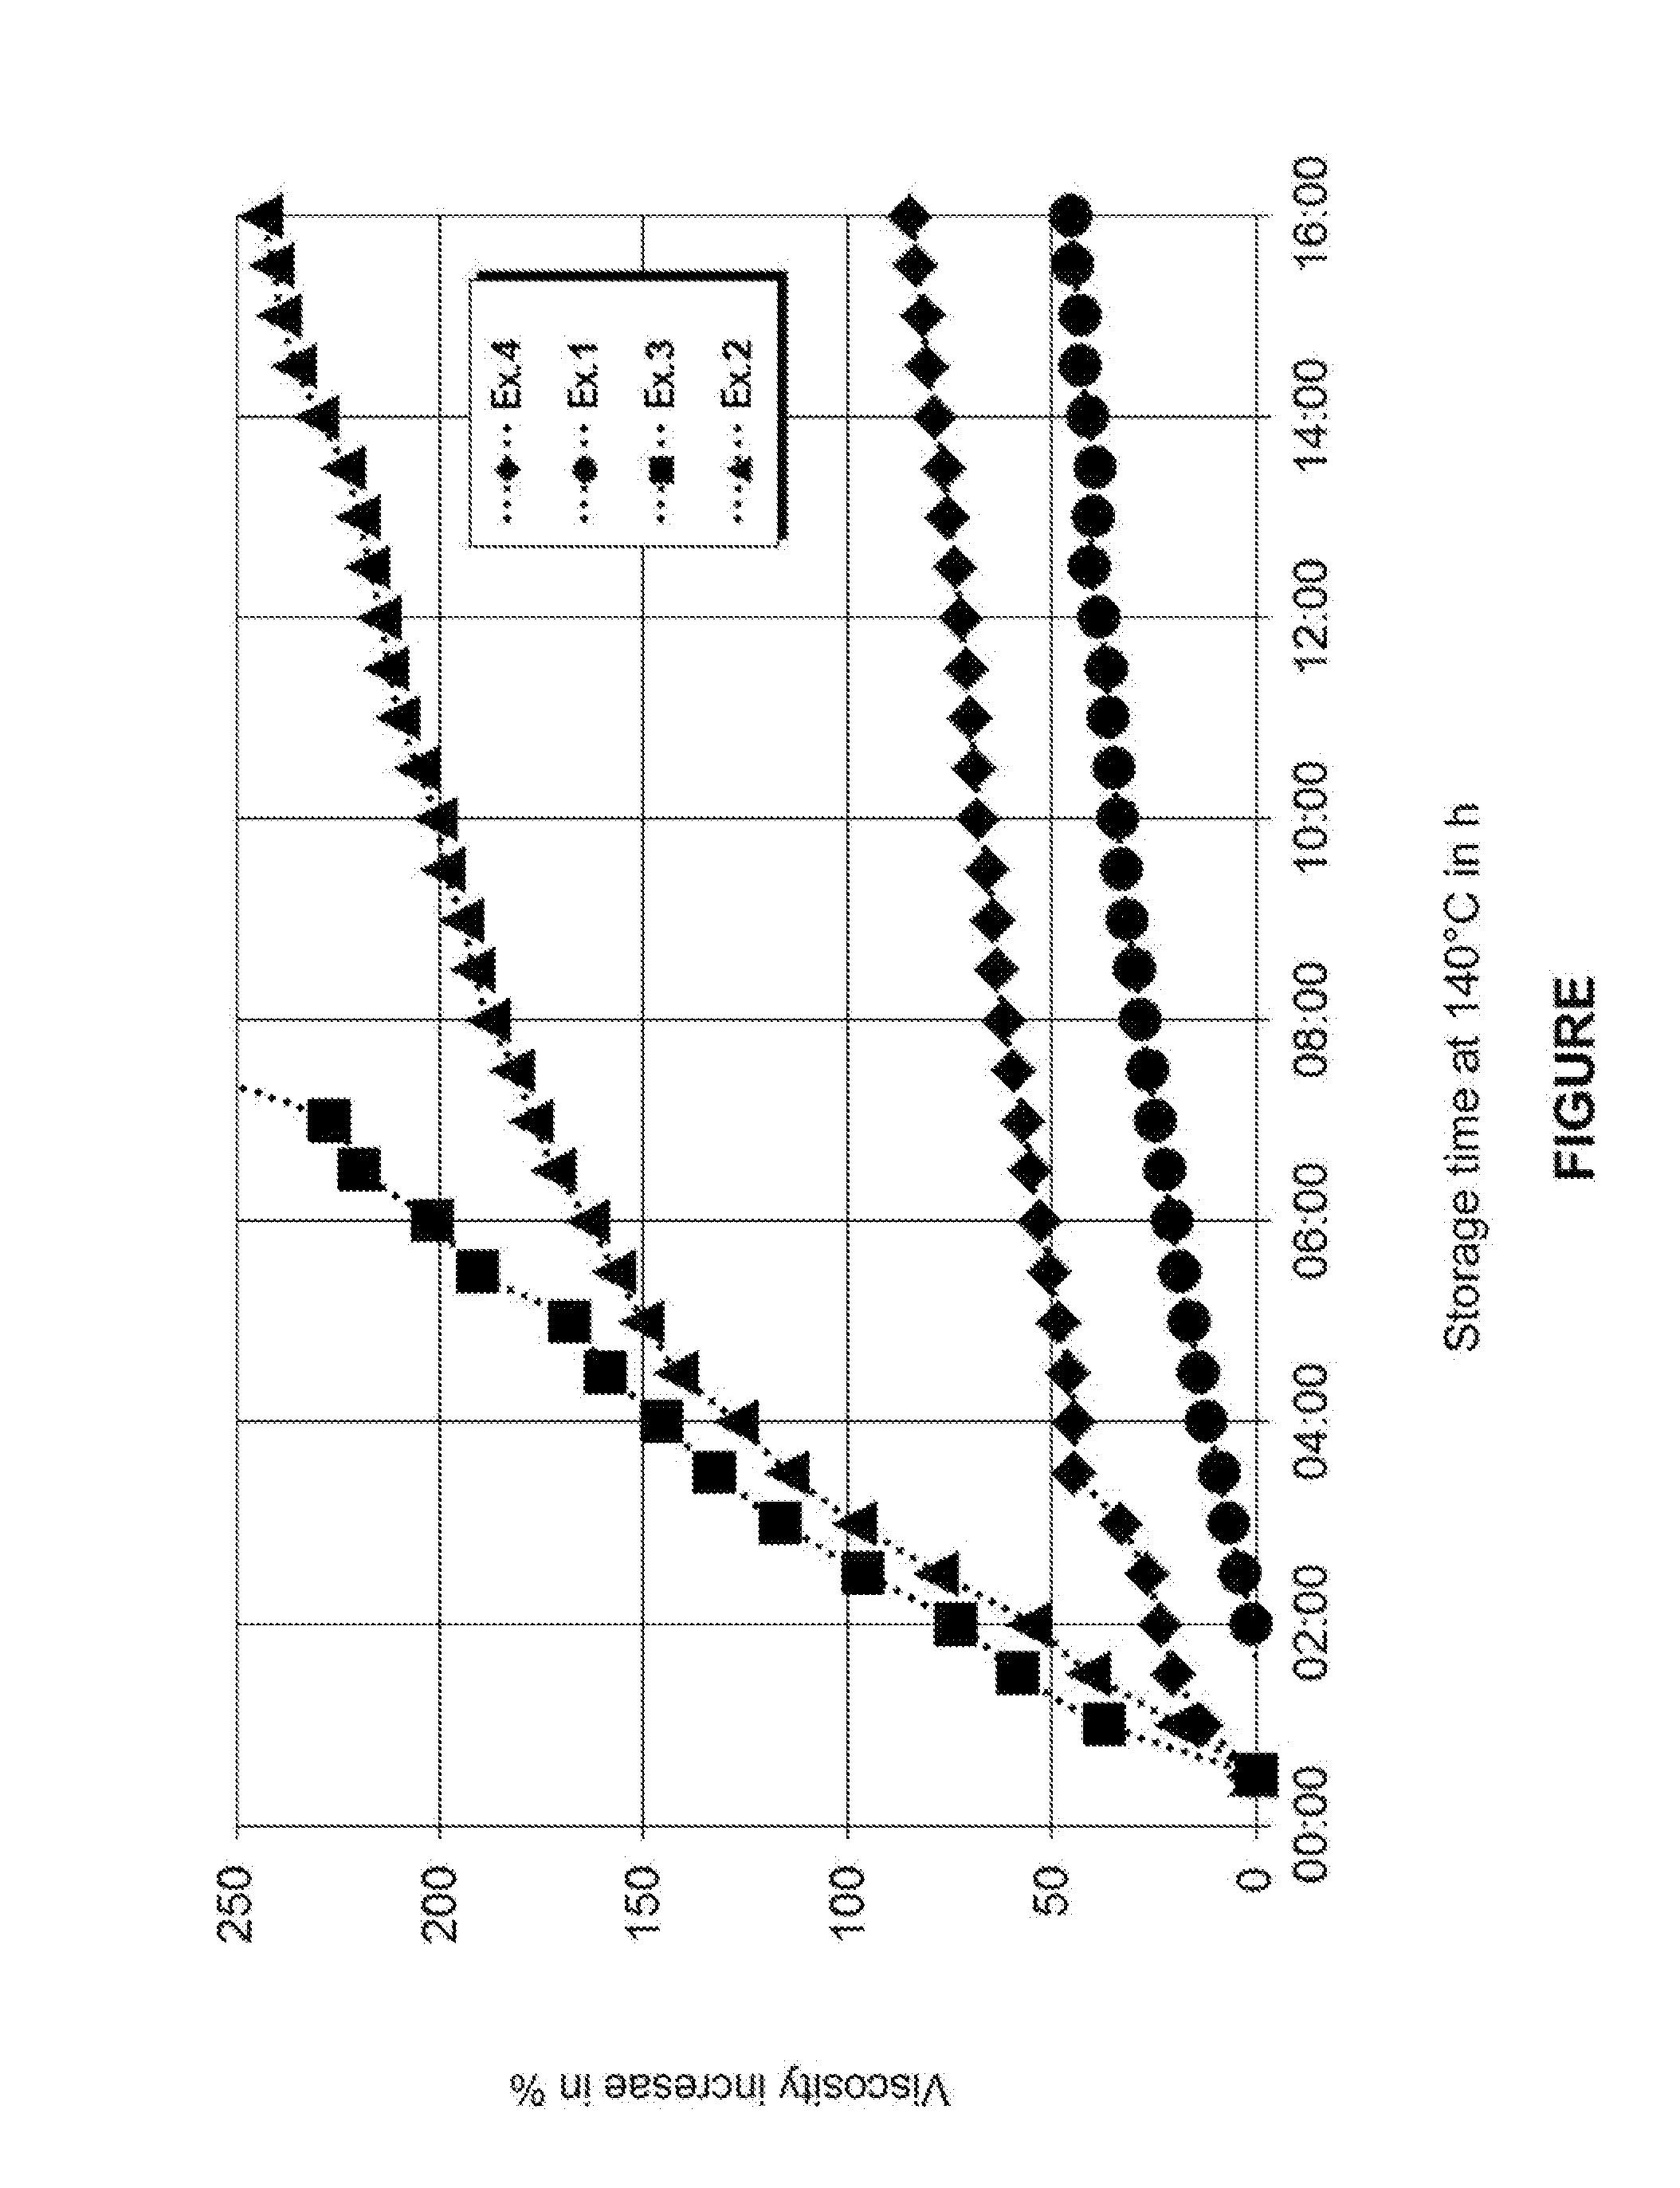 Polyurethane hot-melt adhesive having a low content of diisocyanate monomers and good cross-linking speed